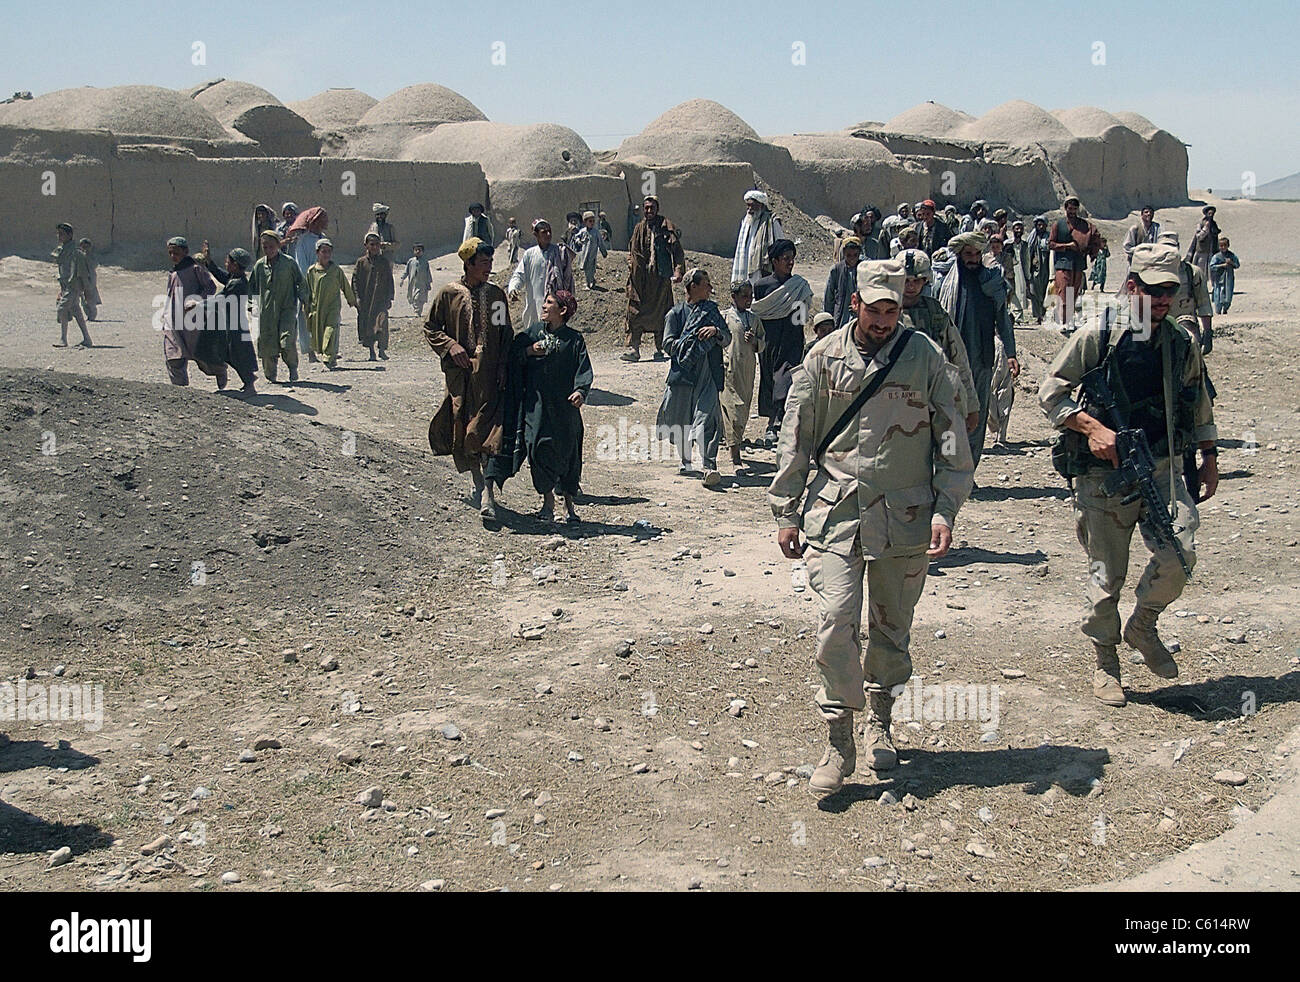 Villagers from Nojoy outside Kandahar International Airport follow the members of the U.S. Army's Tactical Psychological Operations Team as they leave after meeting with the village elders. April 16 2002., Photo by:Everett Collection(BSLOC 2011 6 91) Stock Photo